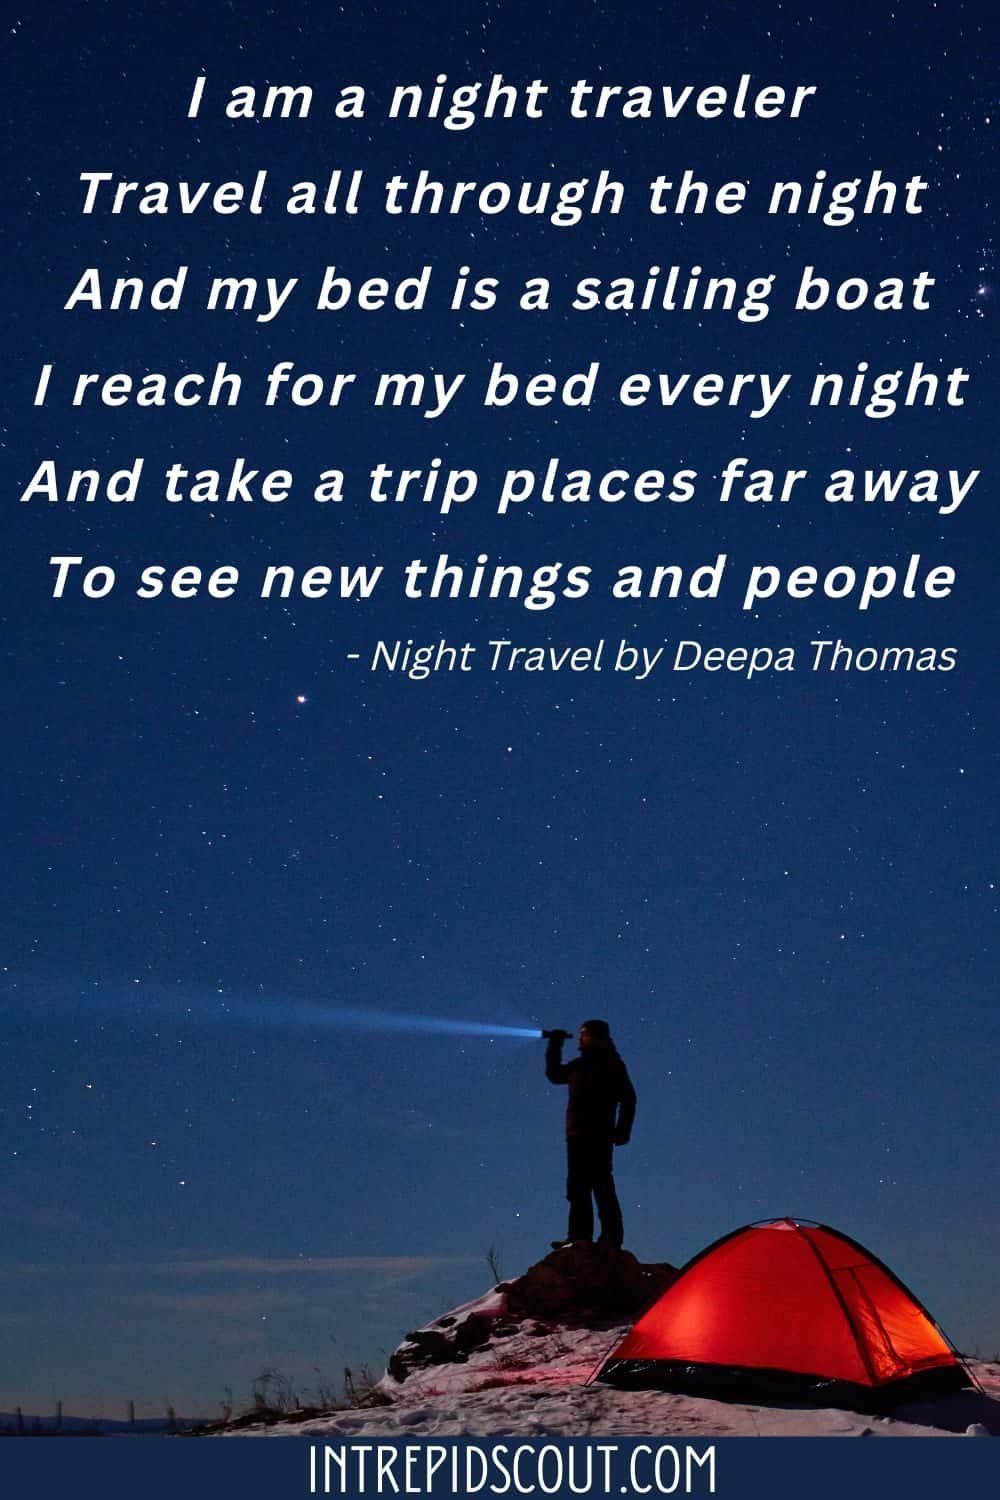 Poems About Travel